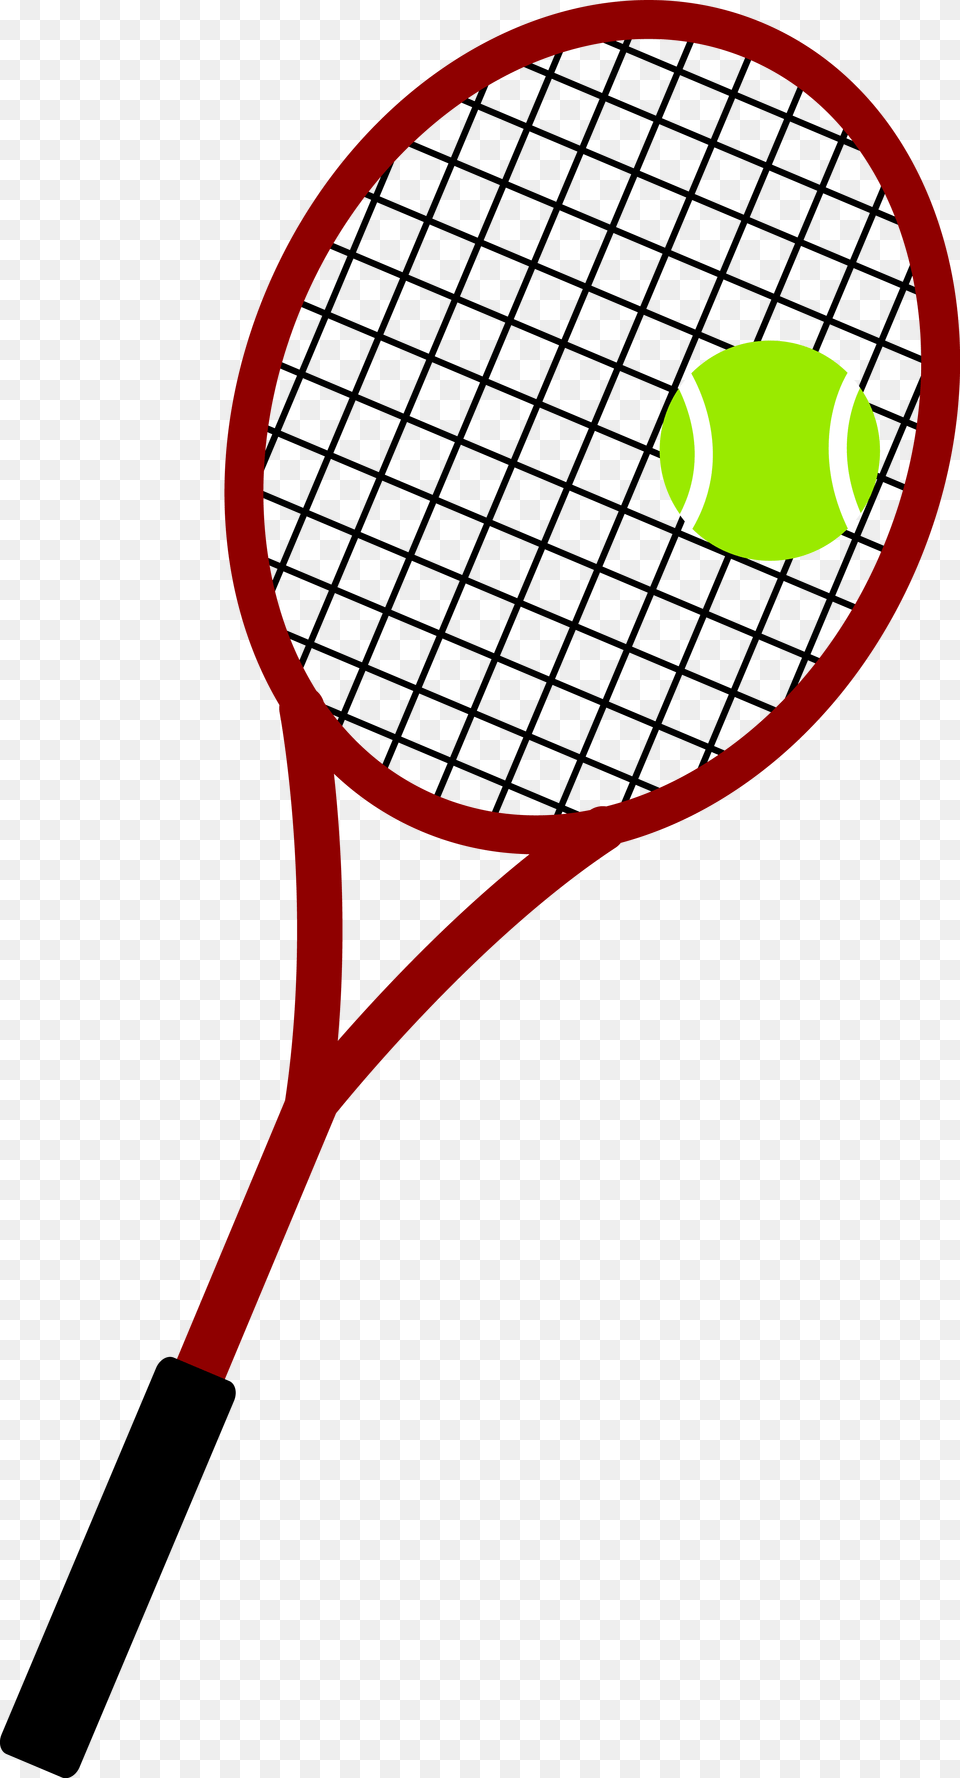 Tennis Ball And Racket Image Pink Tennis Racket And Ball, Sport, Tennis Ball, Hole, Tennis Racket Free Png Download